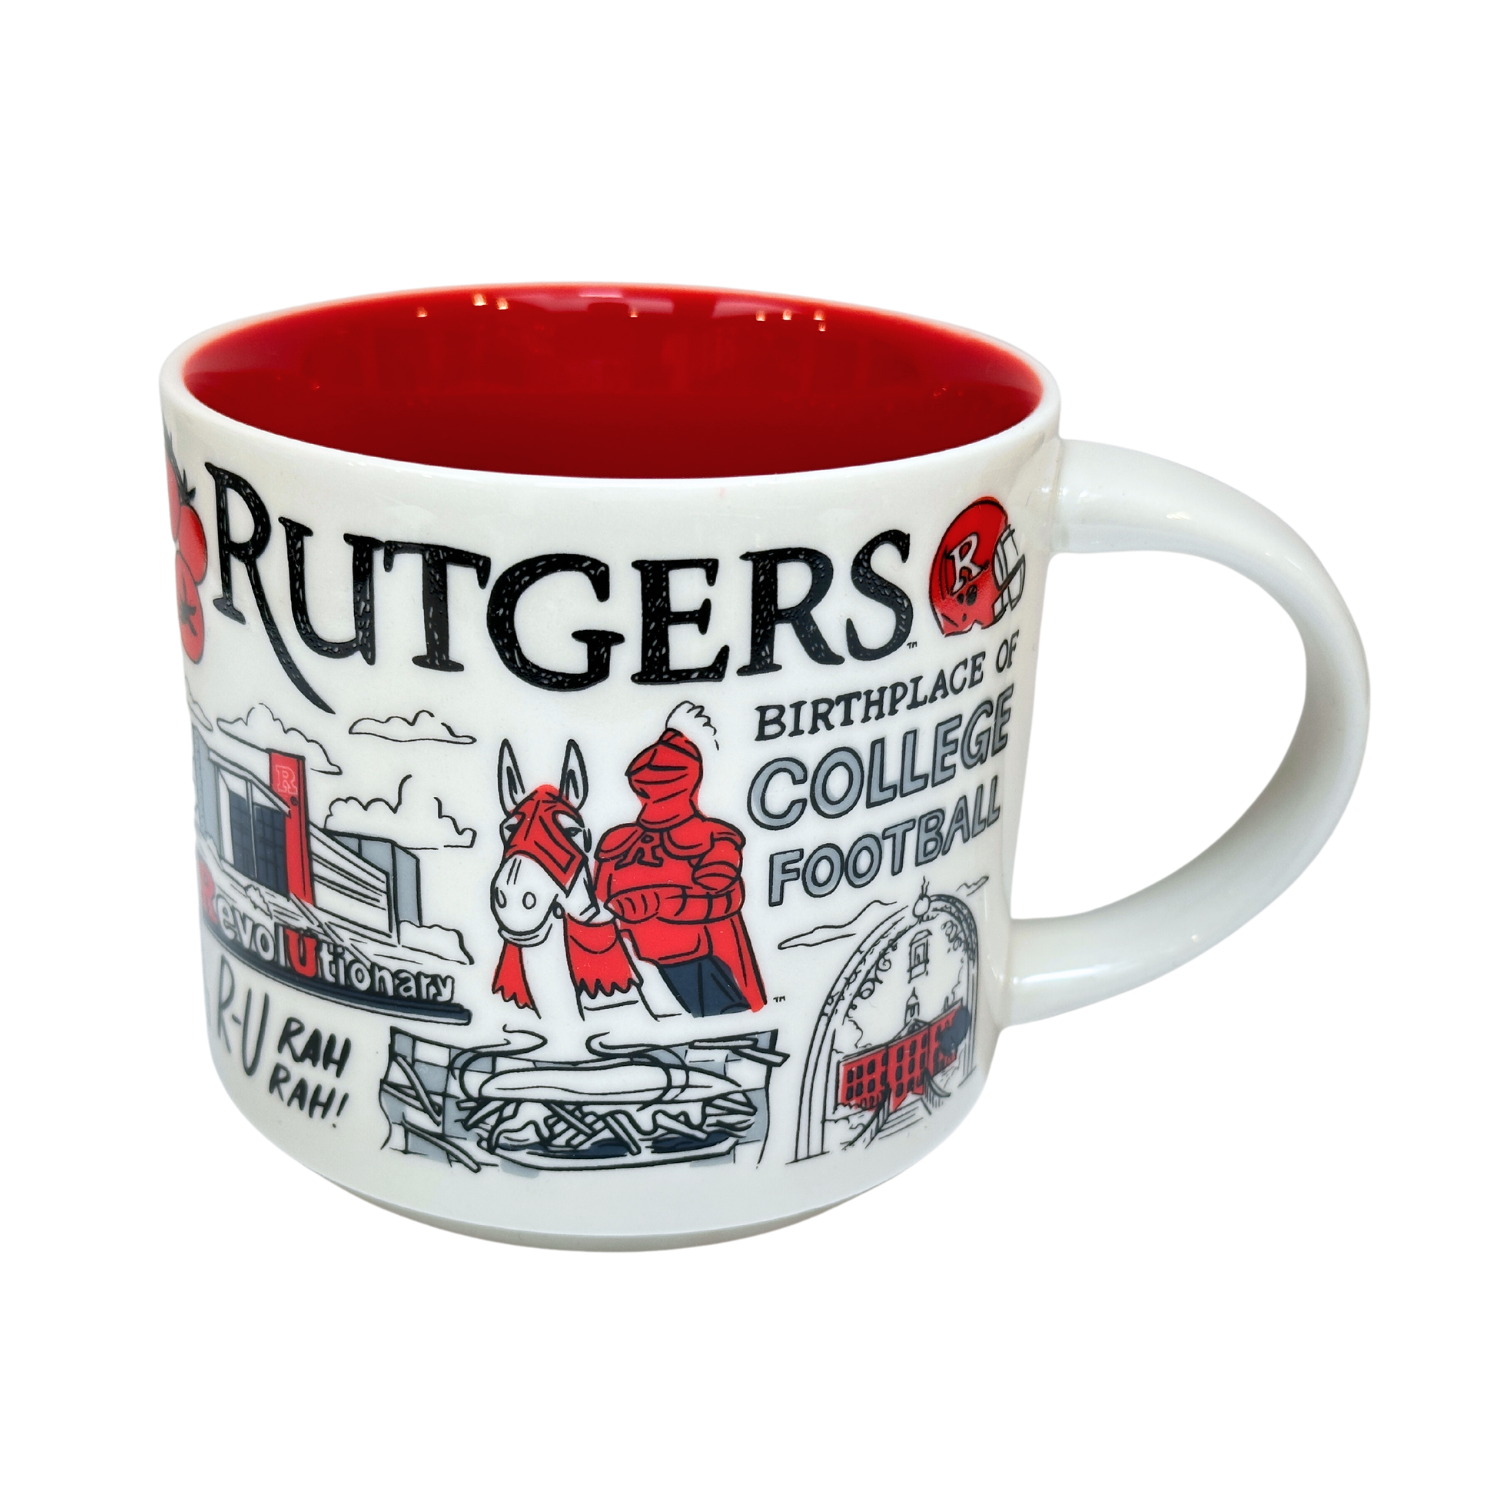 Starbucks Been There Series Mug Cup Rutgers College Football Campus Collection 2022, 14 Oz